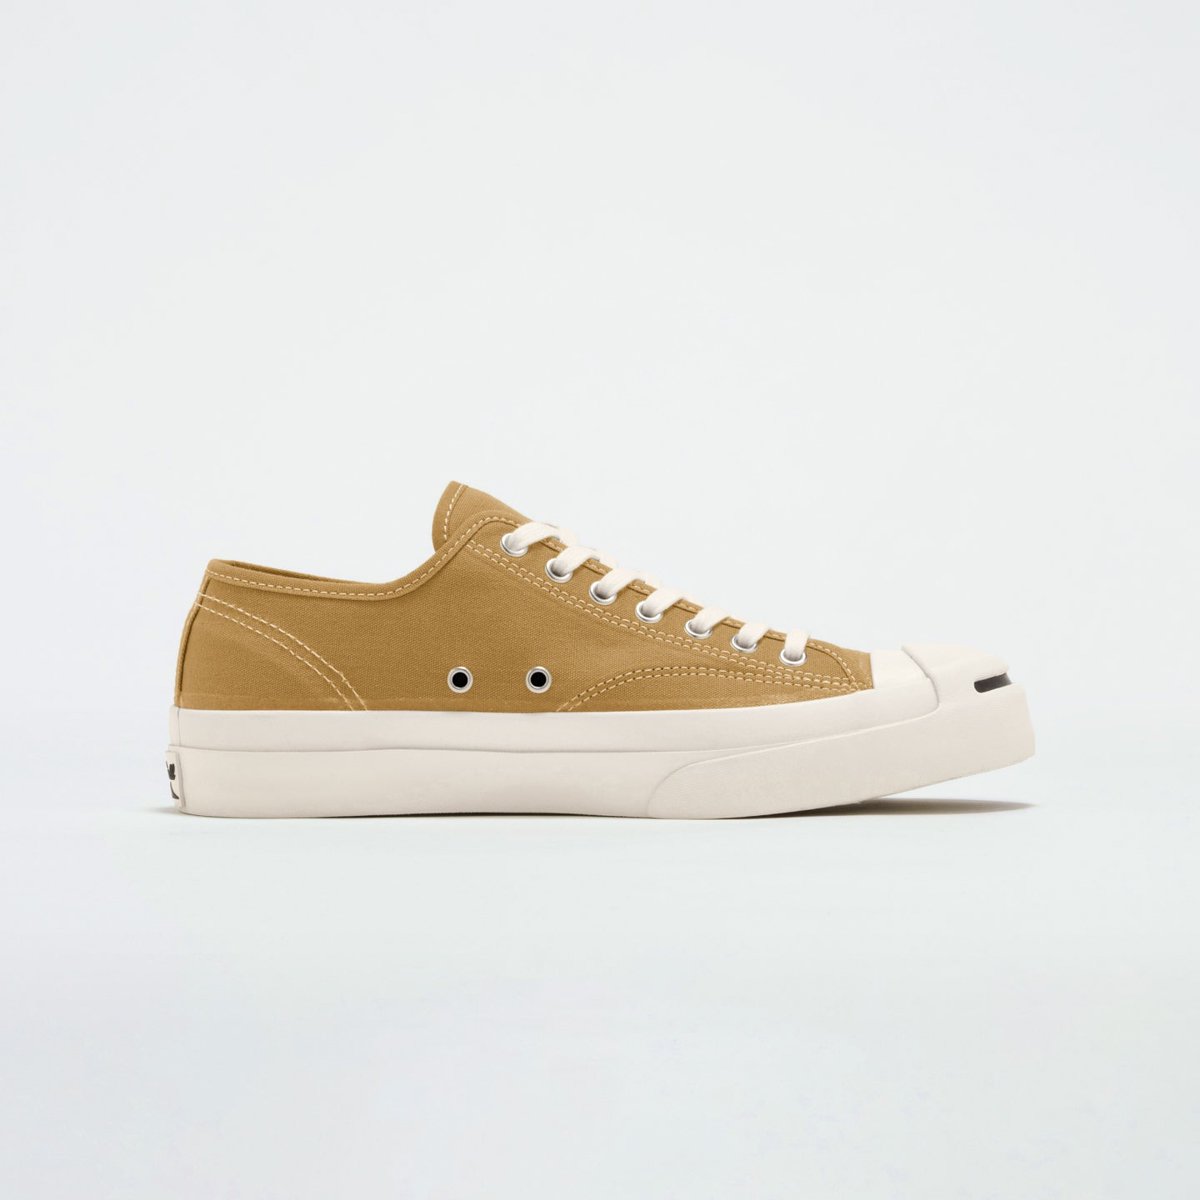 CONVERSE ADDICT * JACK PURCELL CANVAS * Camel